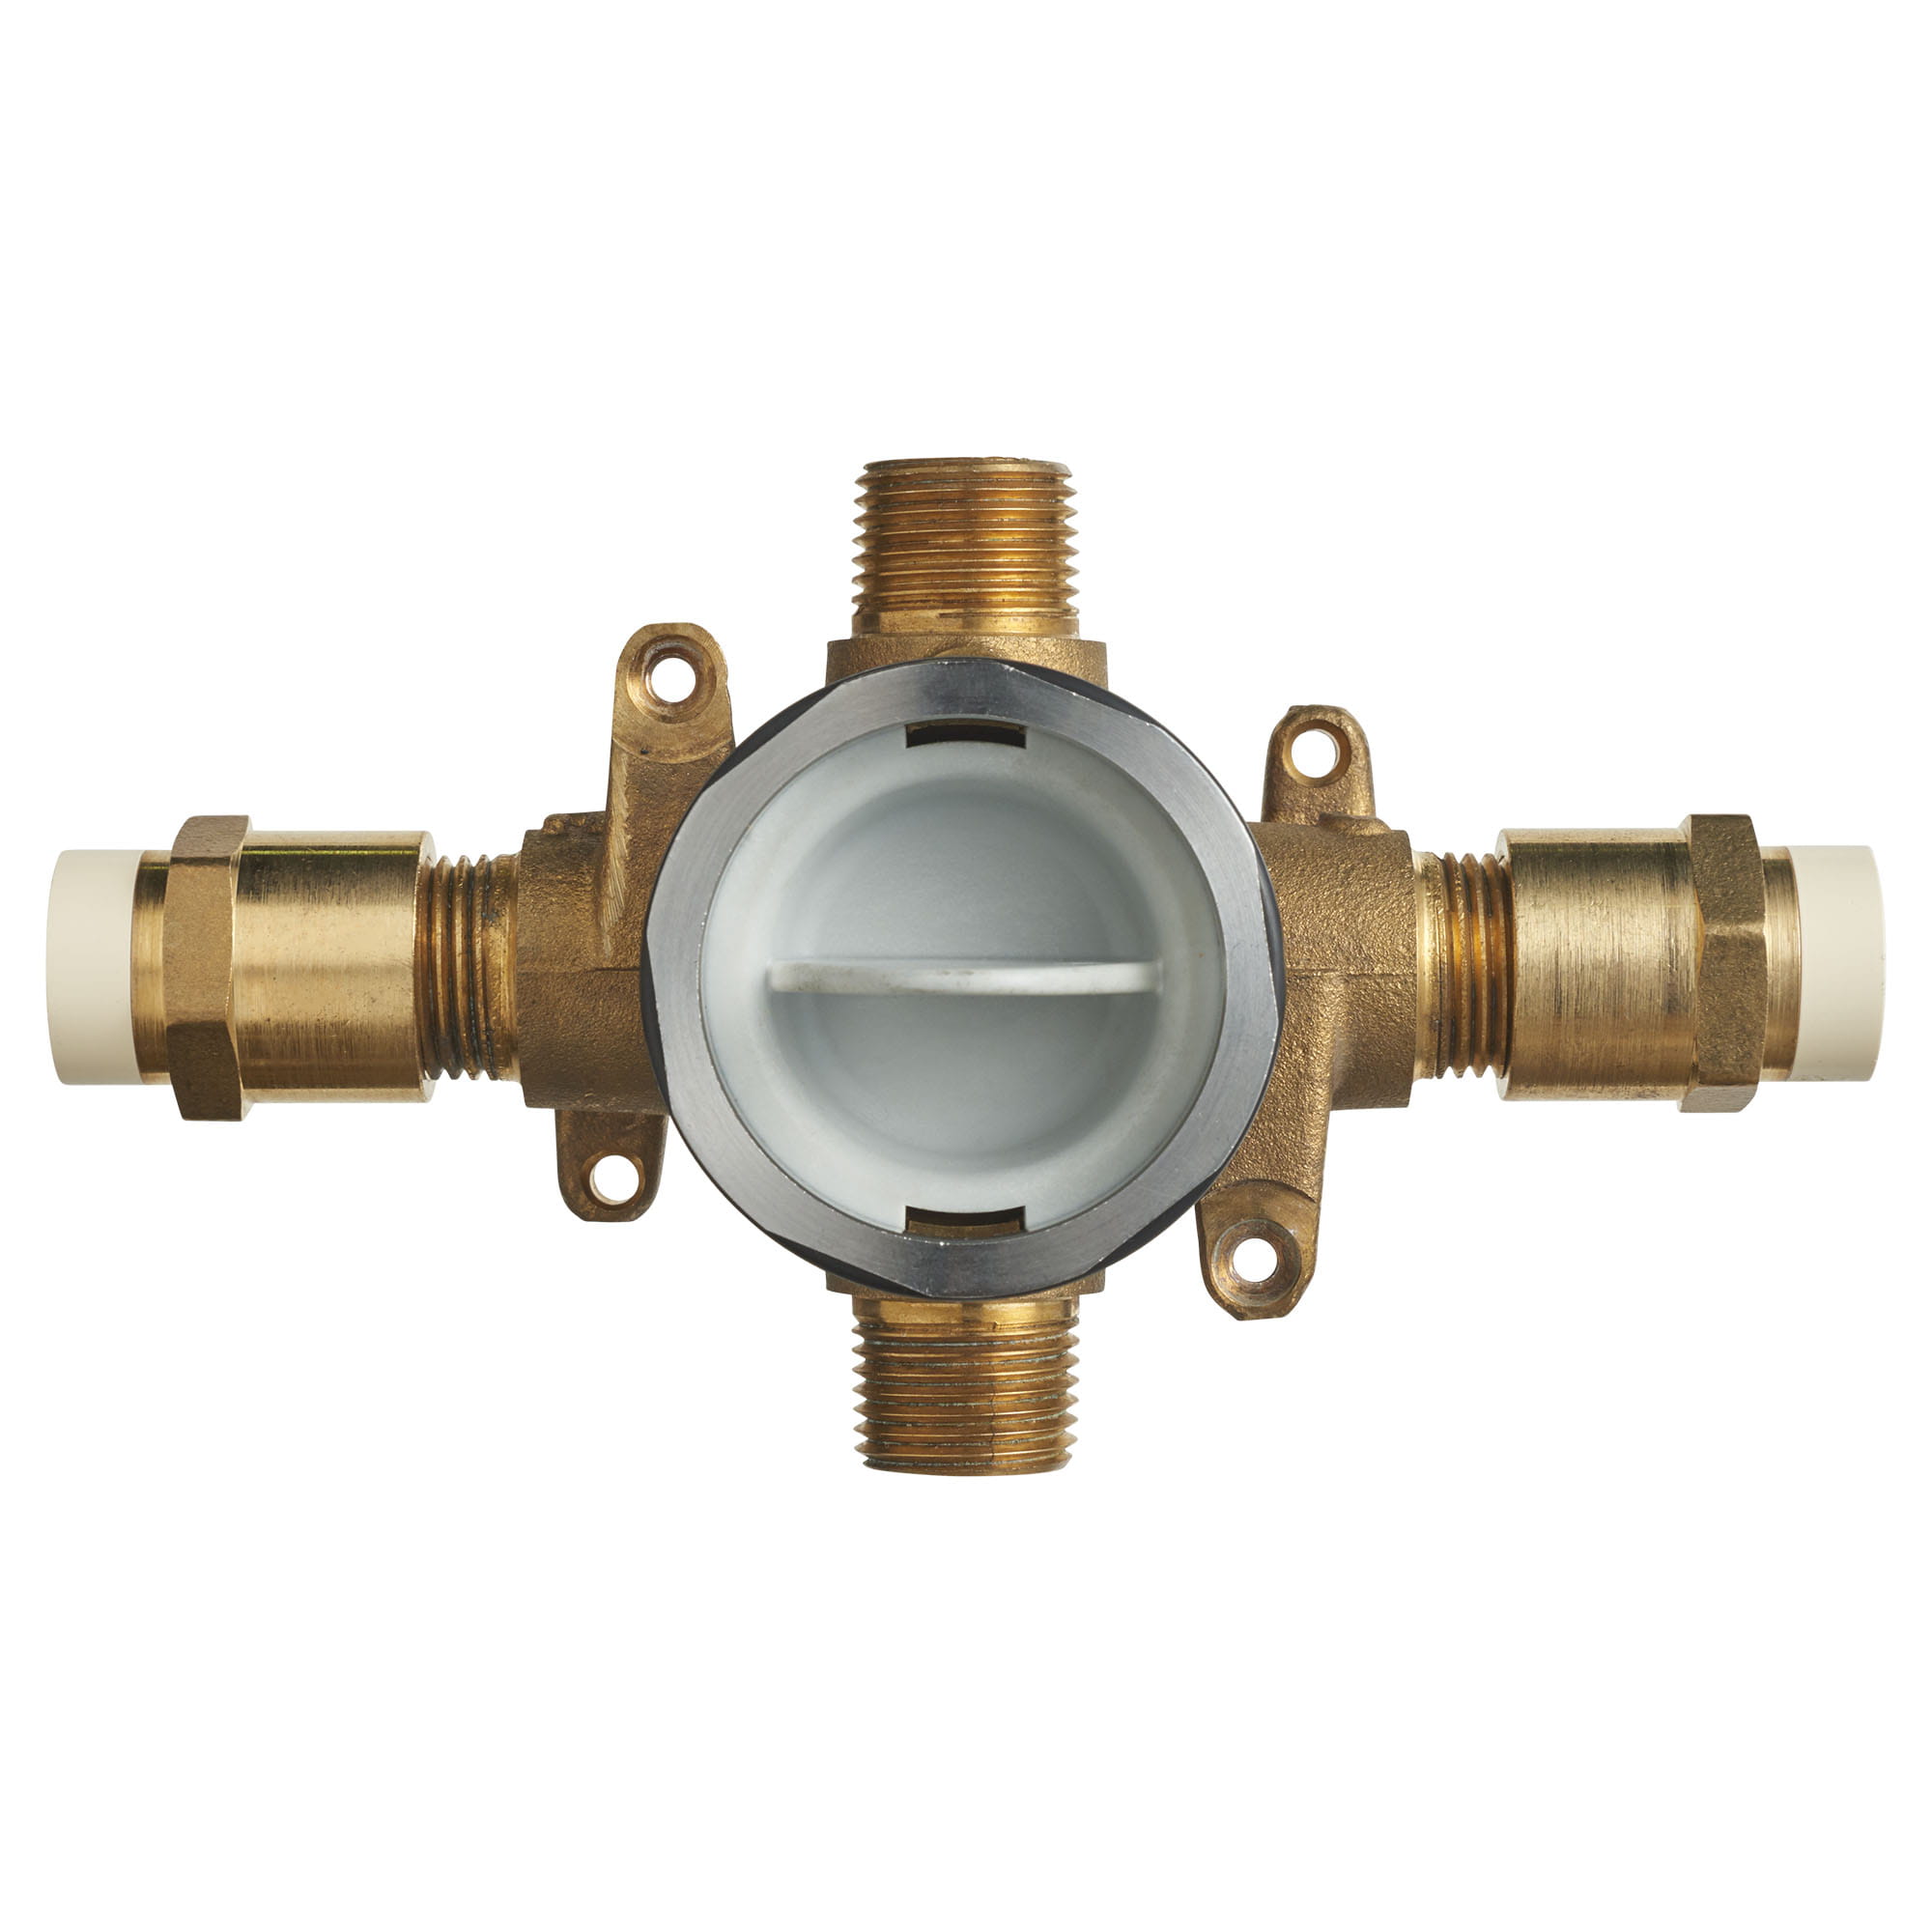 Flash® Shower Rough-In Valve With CPVC Inlets/Universal Outlets